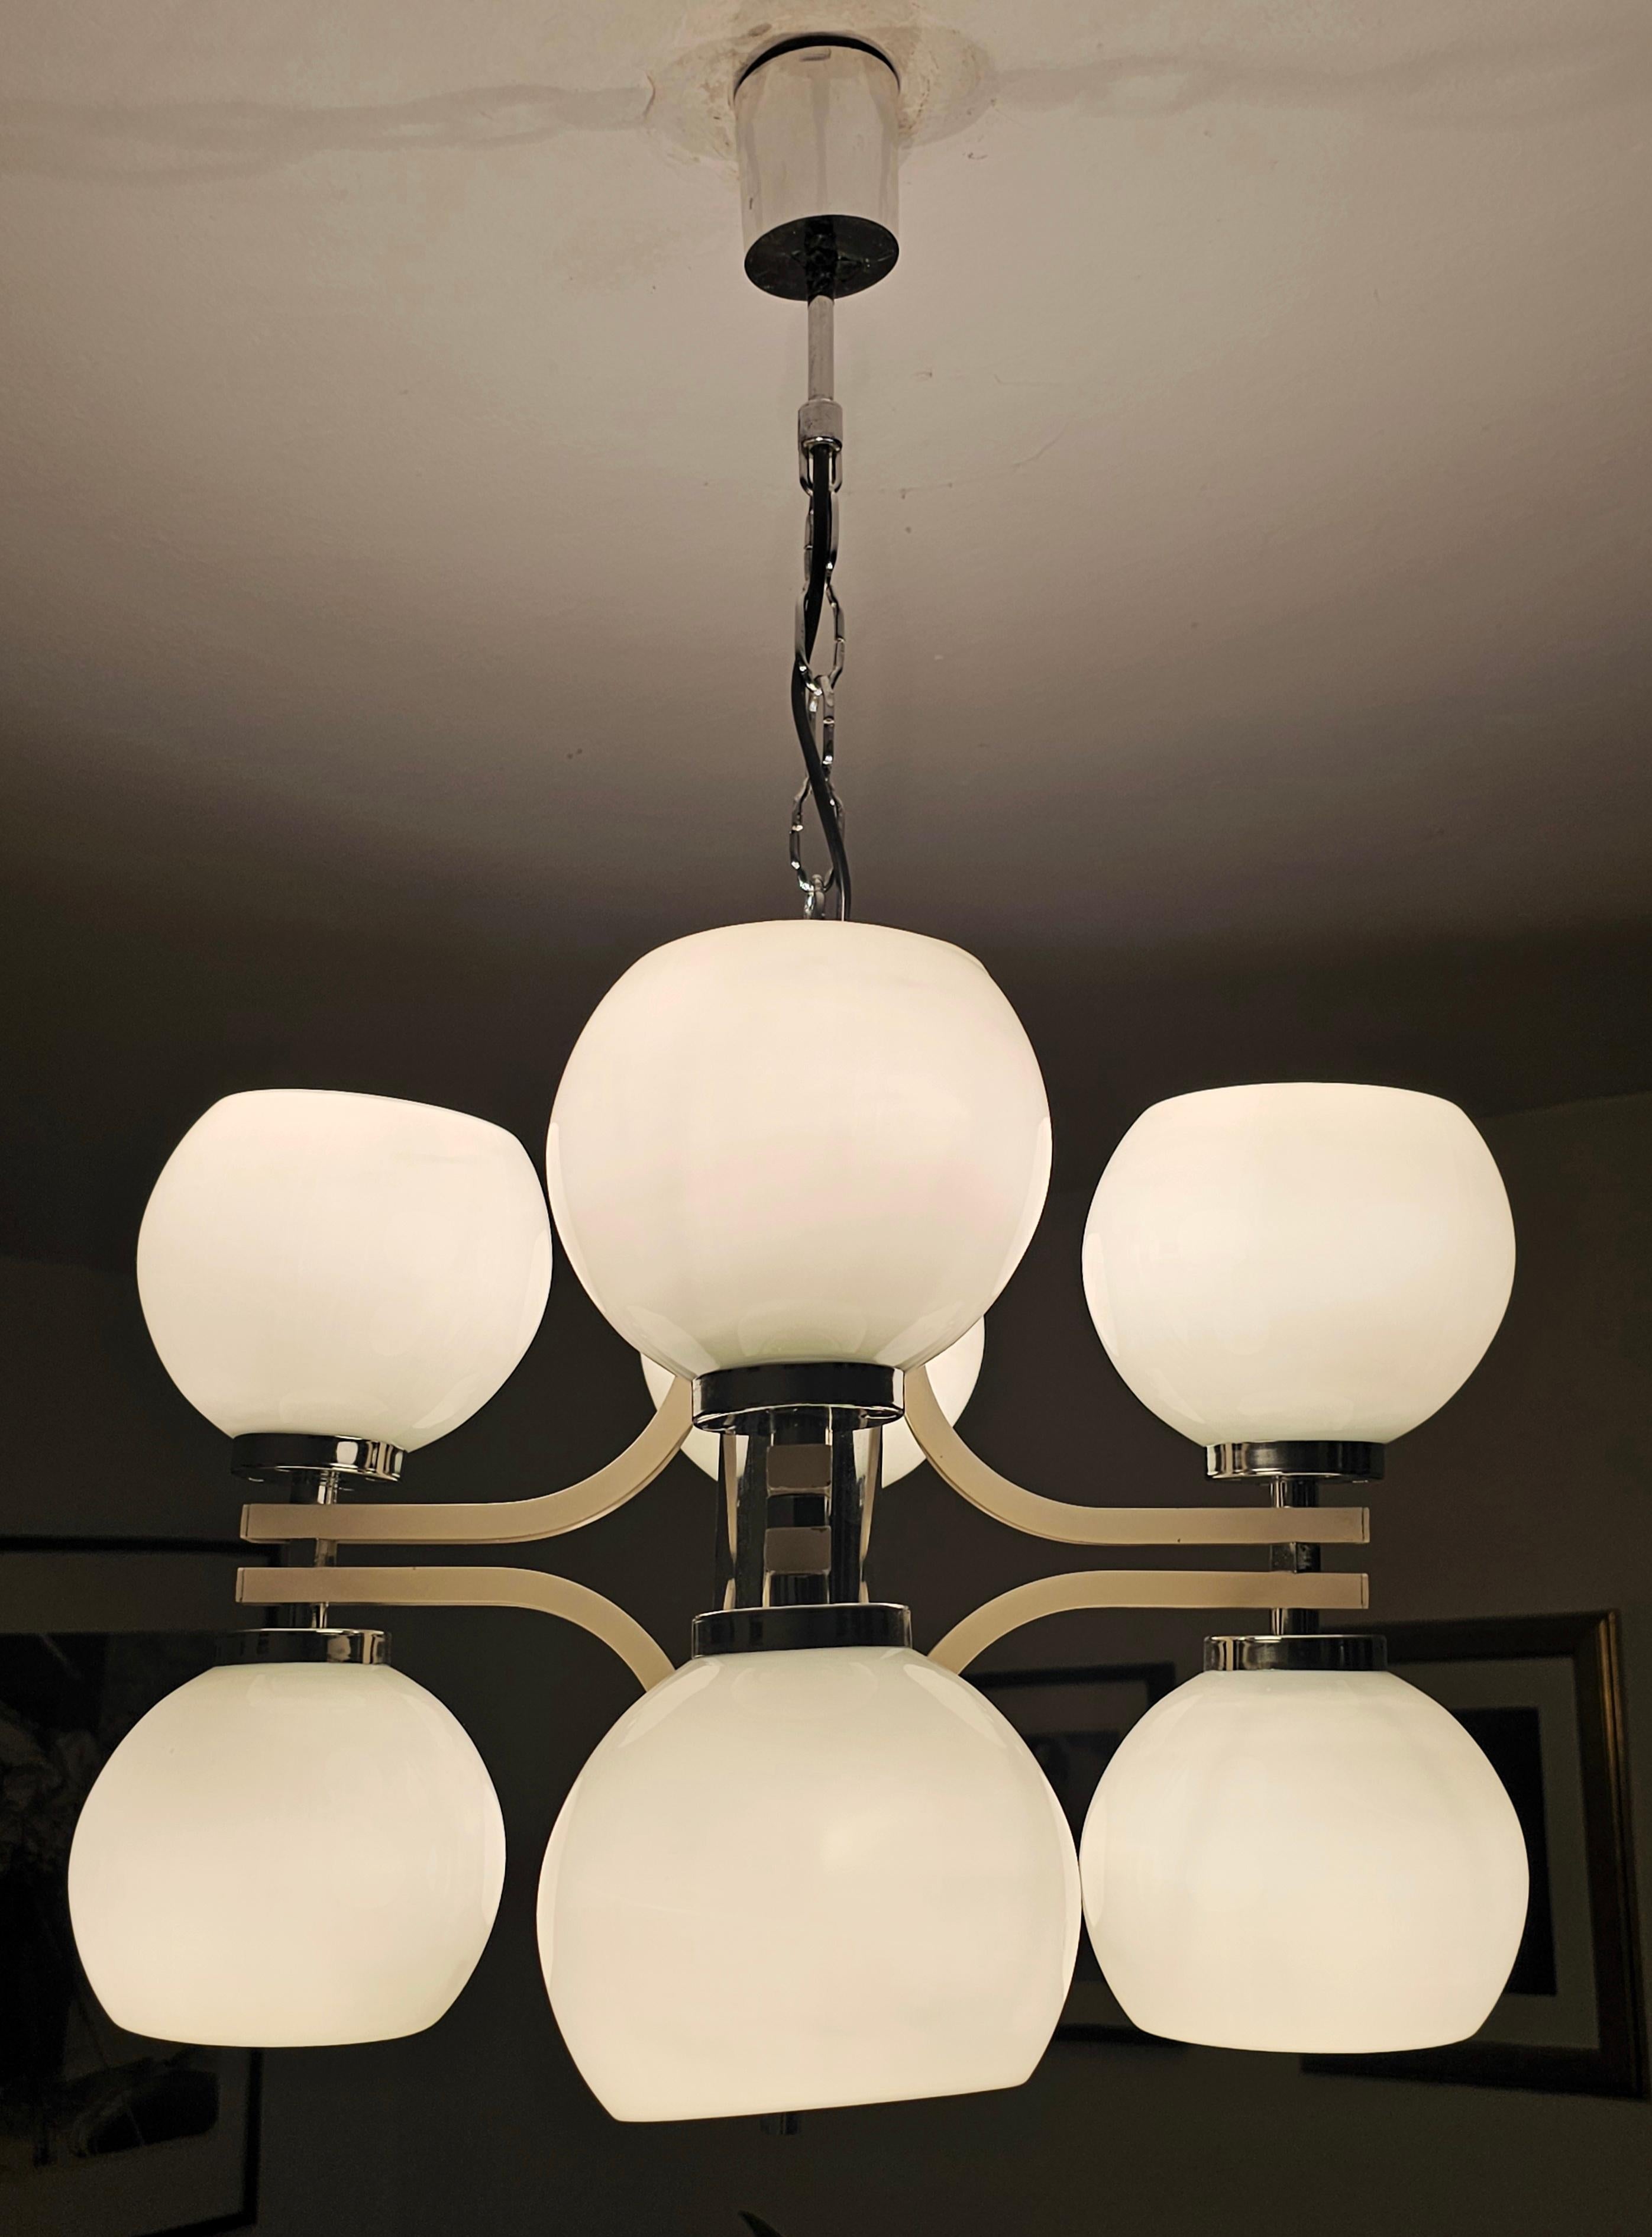 Space Age 8-Light Chandelier with While Glass Shades, Yugoslavia 1970s For Sale 8